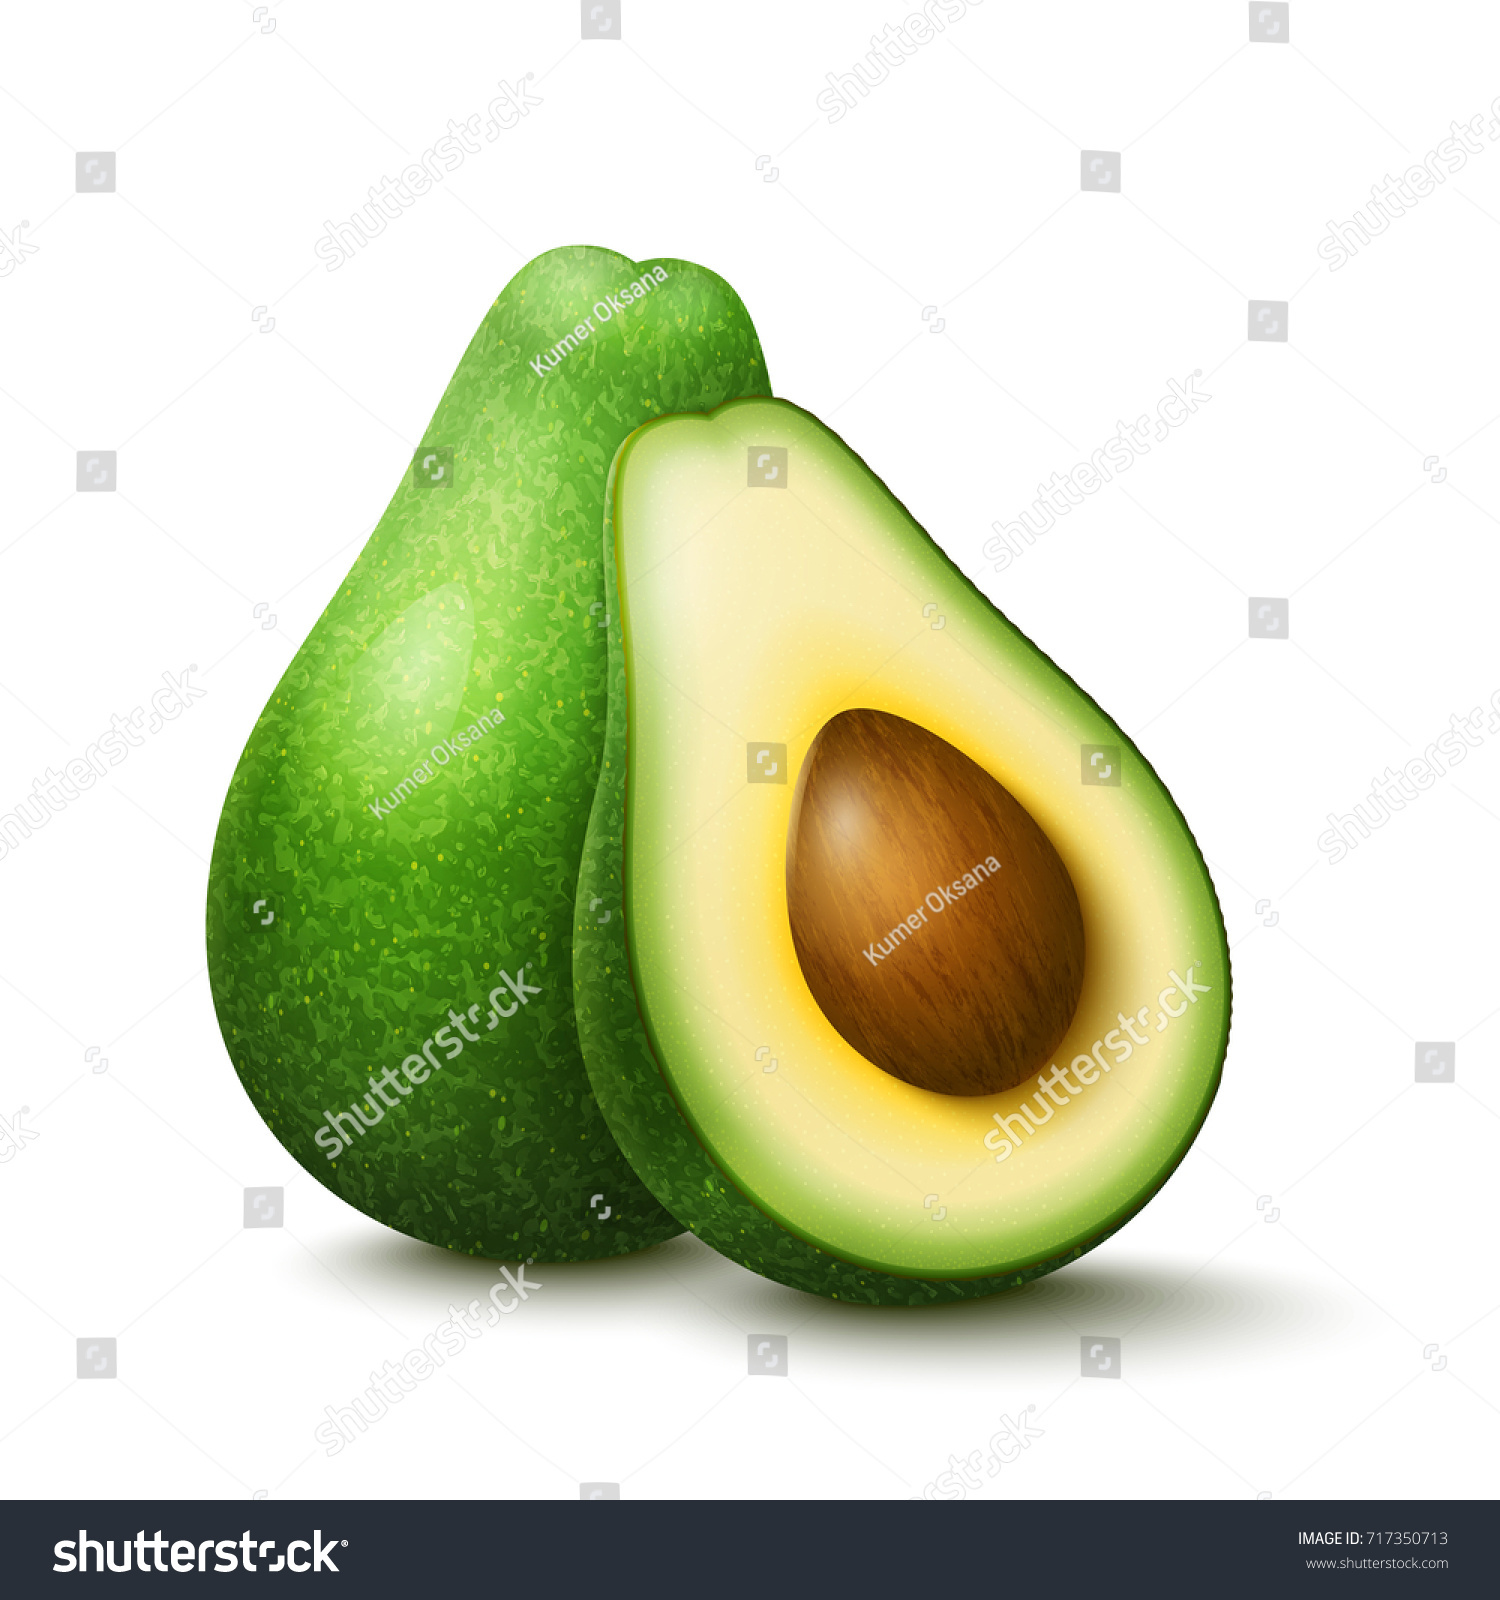 Vector realistic fresh fruit avocado isolated on white background. Whole and cut in half avocado with pit #717350713